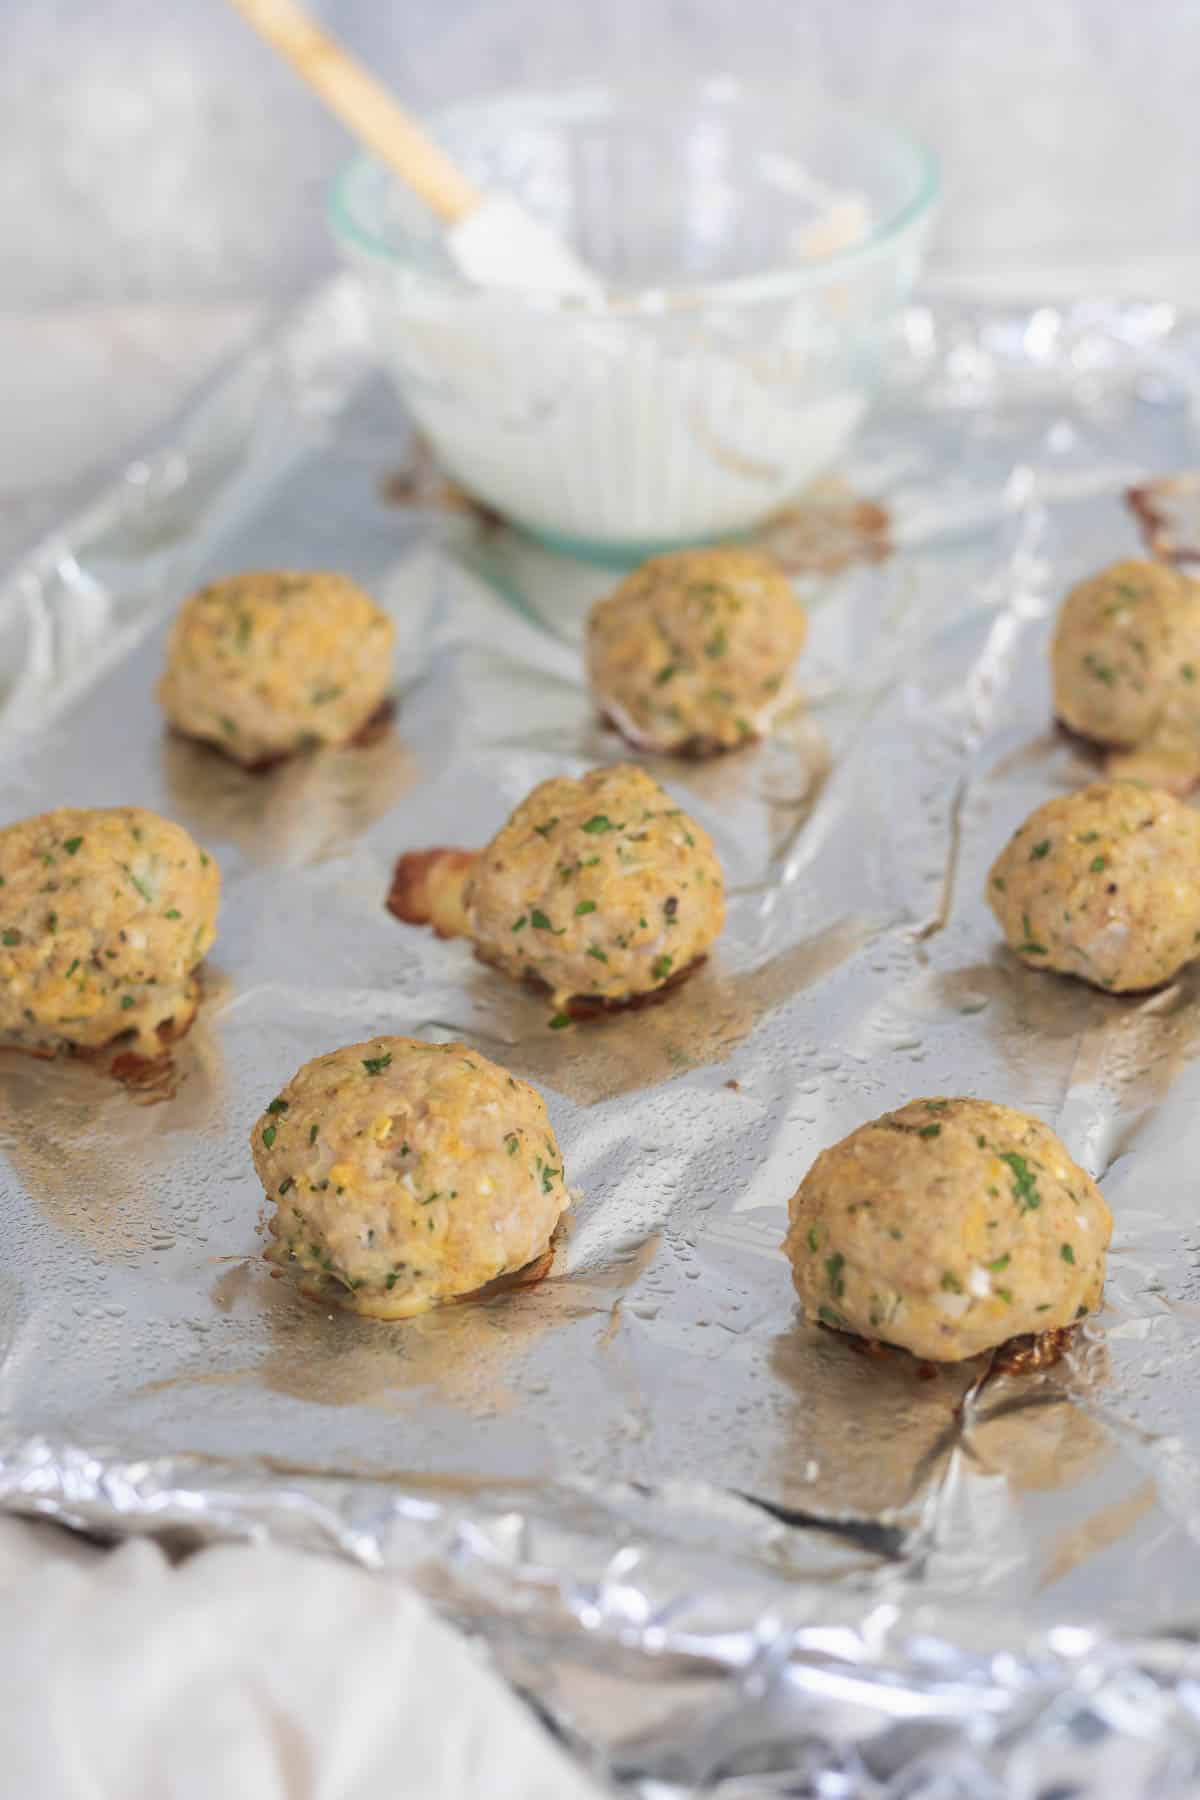 Cooked chicken meatballs on a foil baking sheet with yogurt sauce in the background